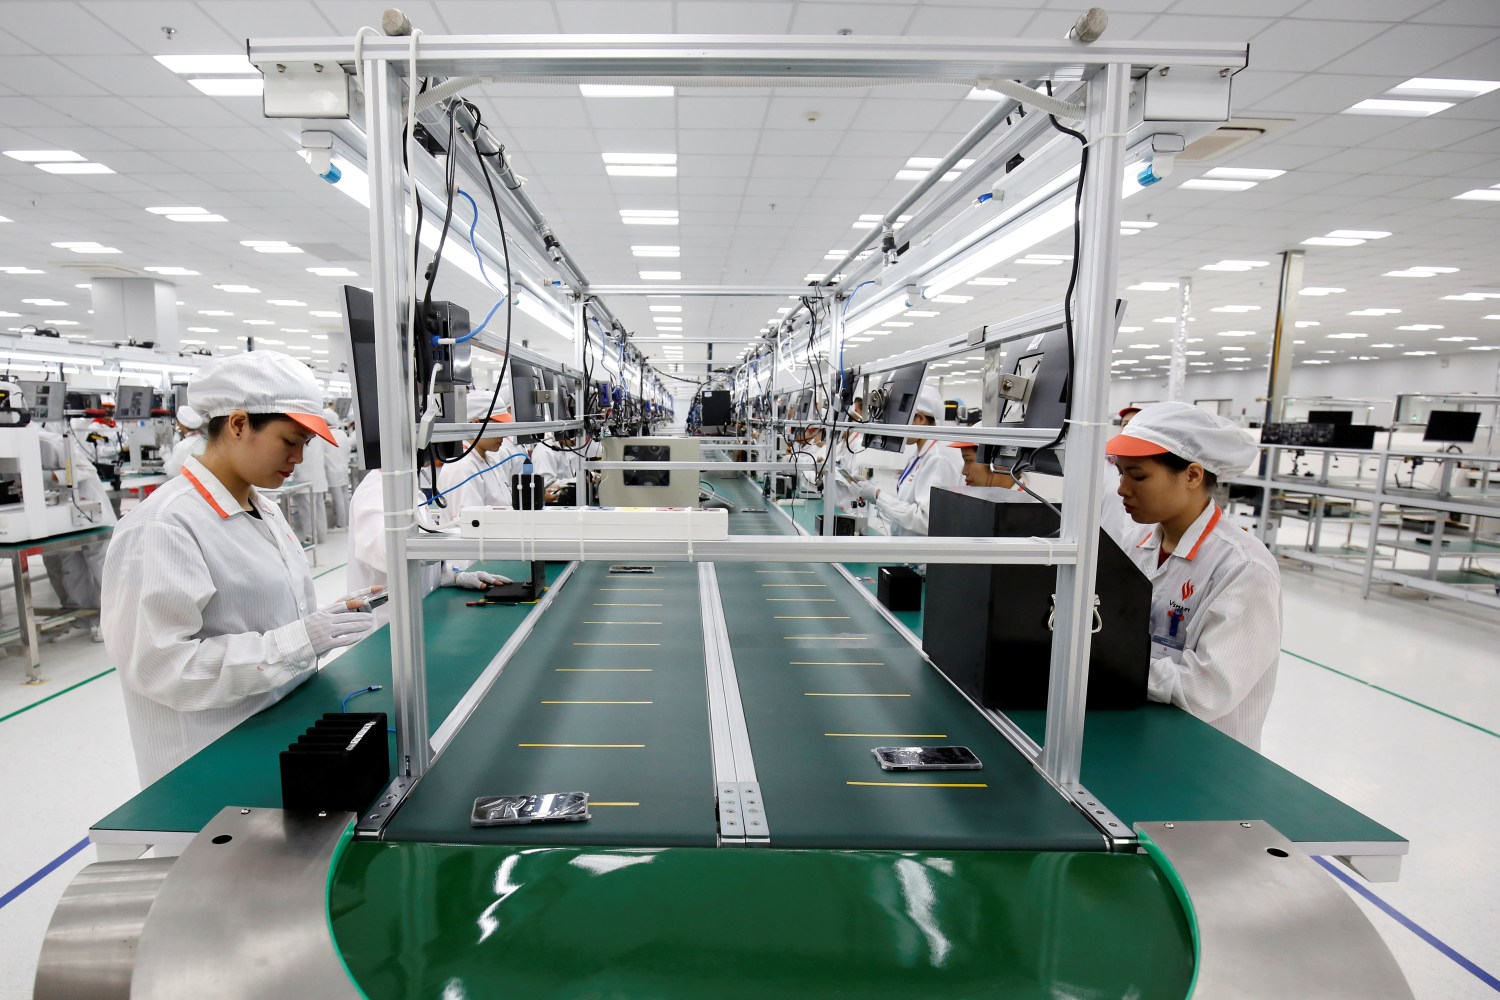 Manufacturers work at an assembly line of Vingroup's Vsmart phone in Hai Phong.